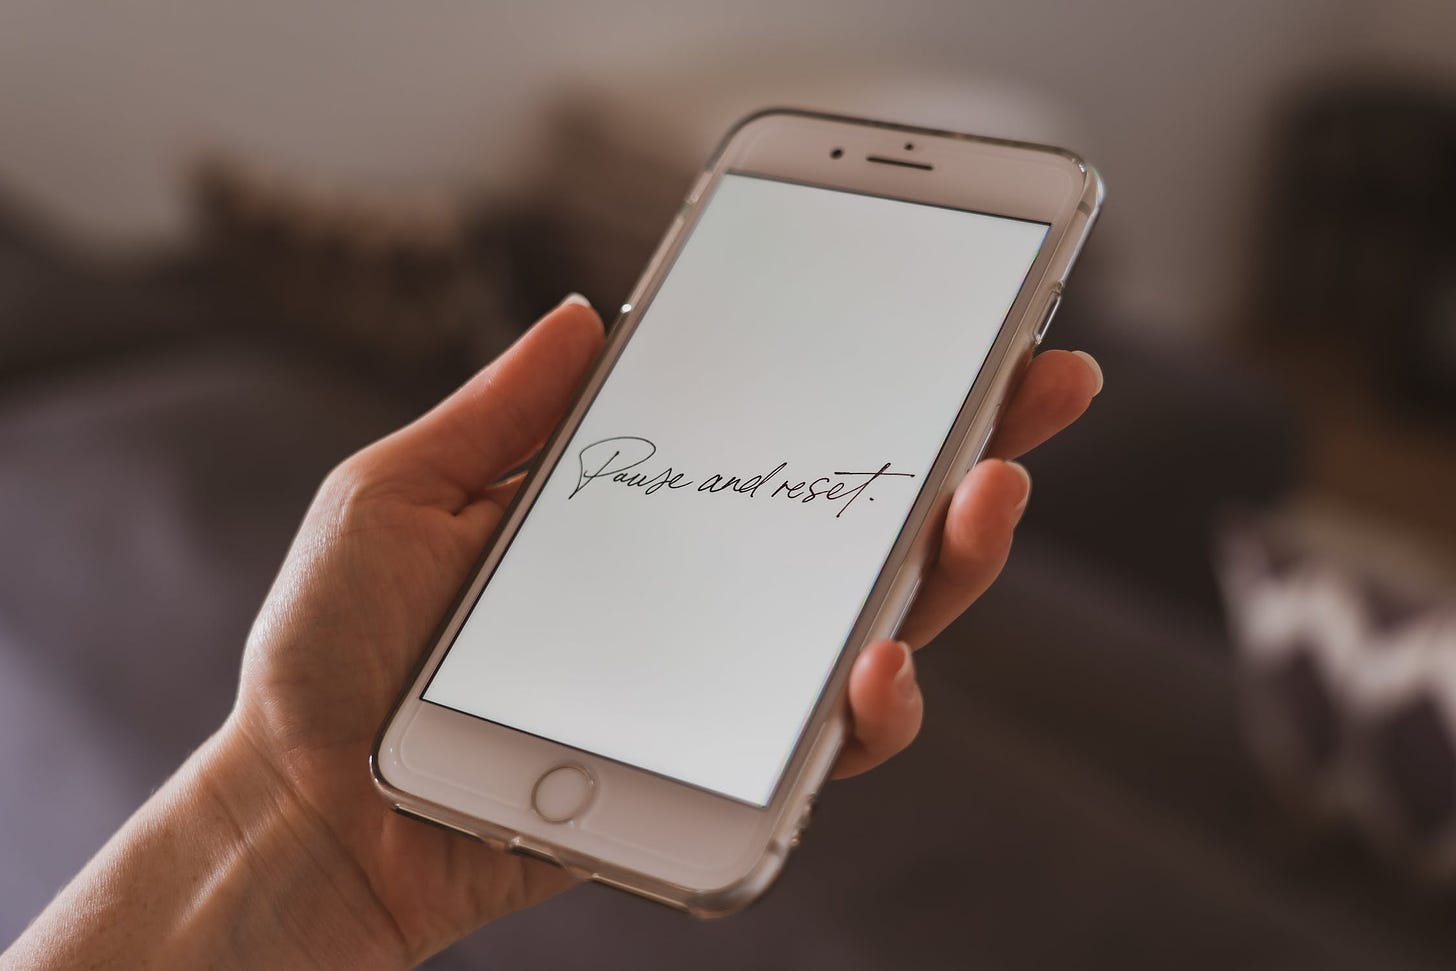 "Pause and reset" written in cursive on phone's display